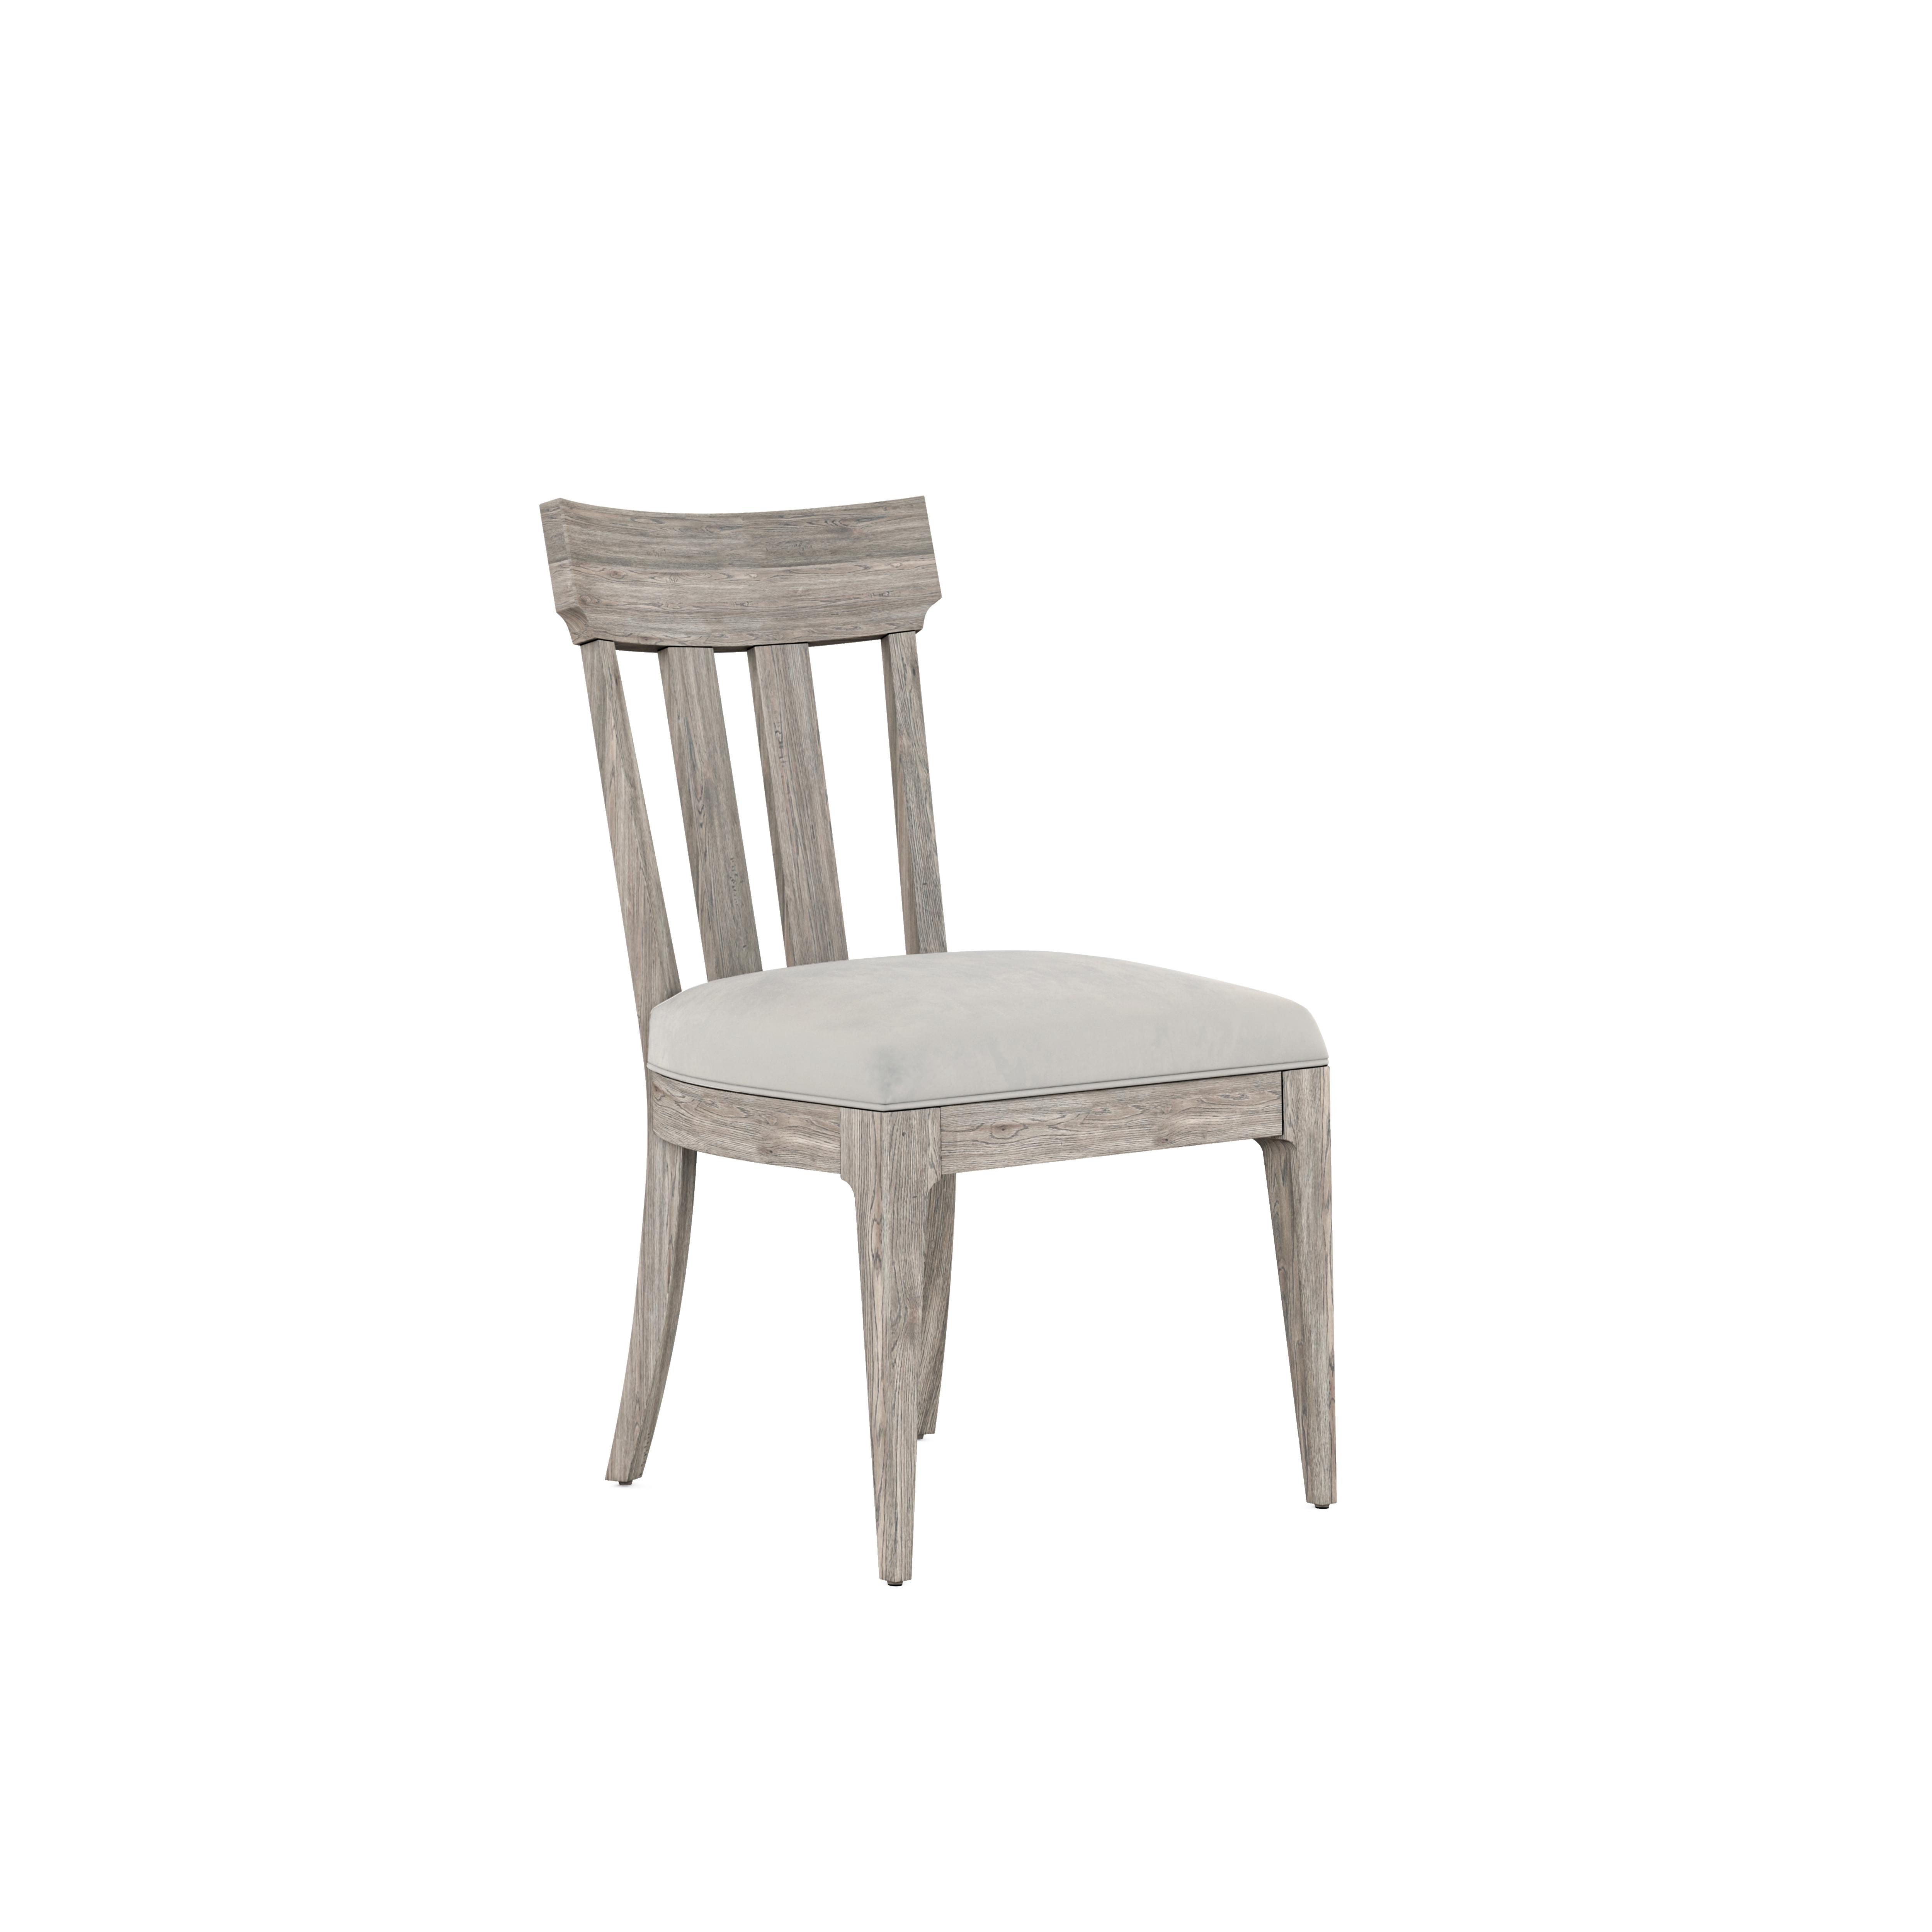 Traditional, Farmhouse Dining Chair Set Sojourn 316204-2311 in Beige Fabric